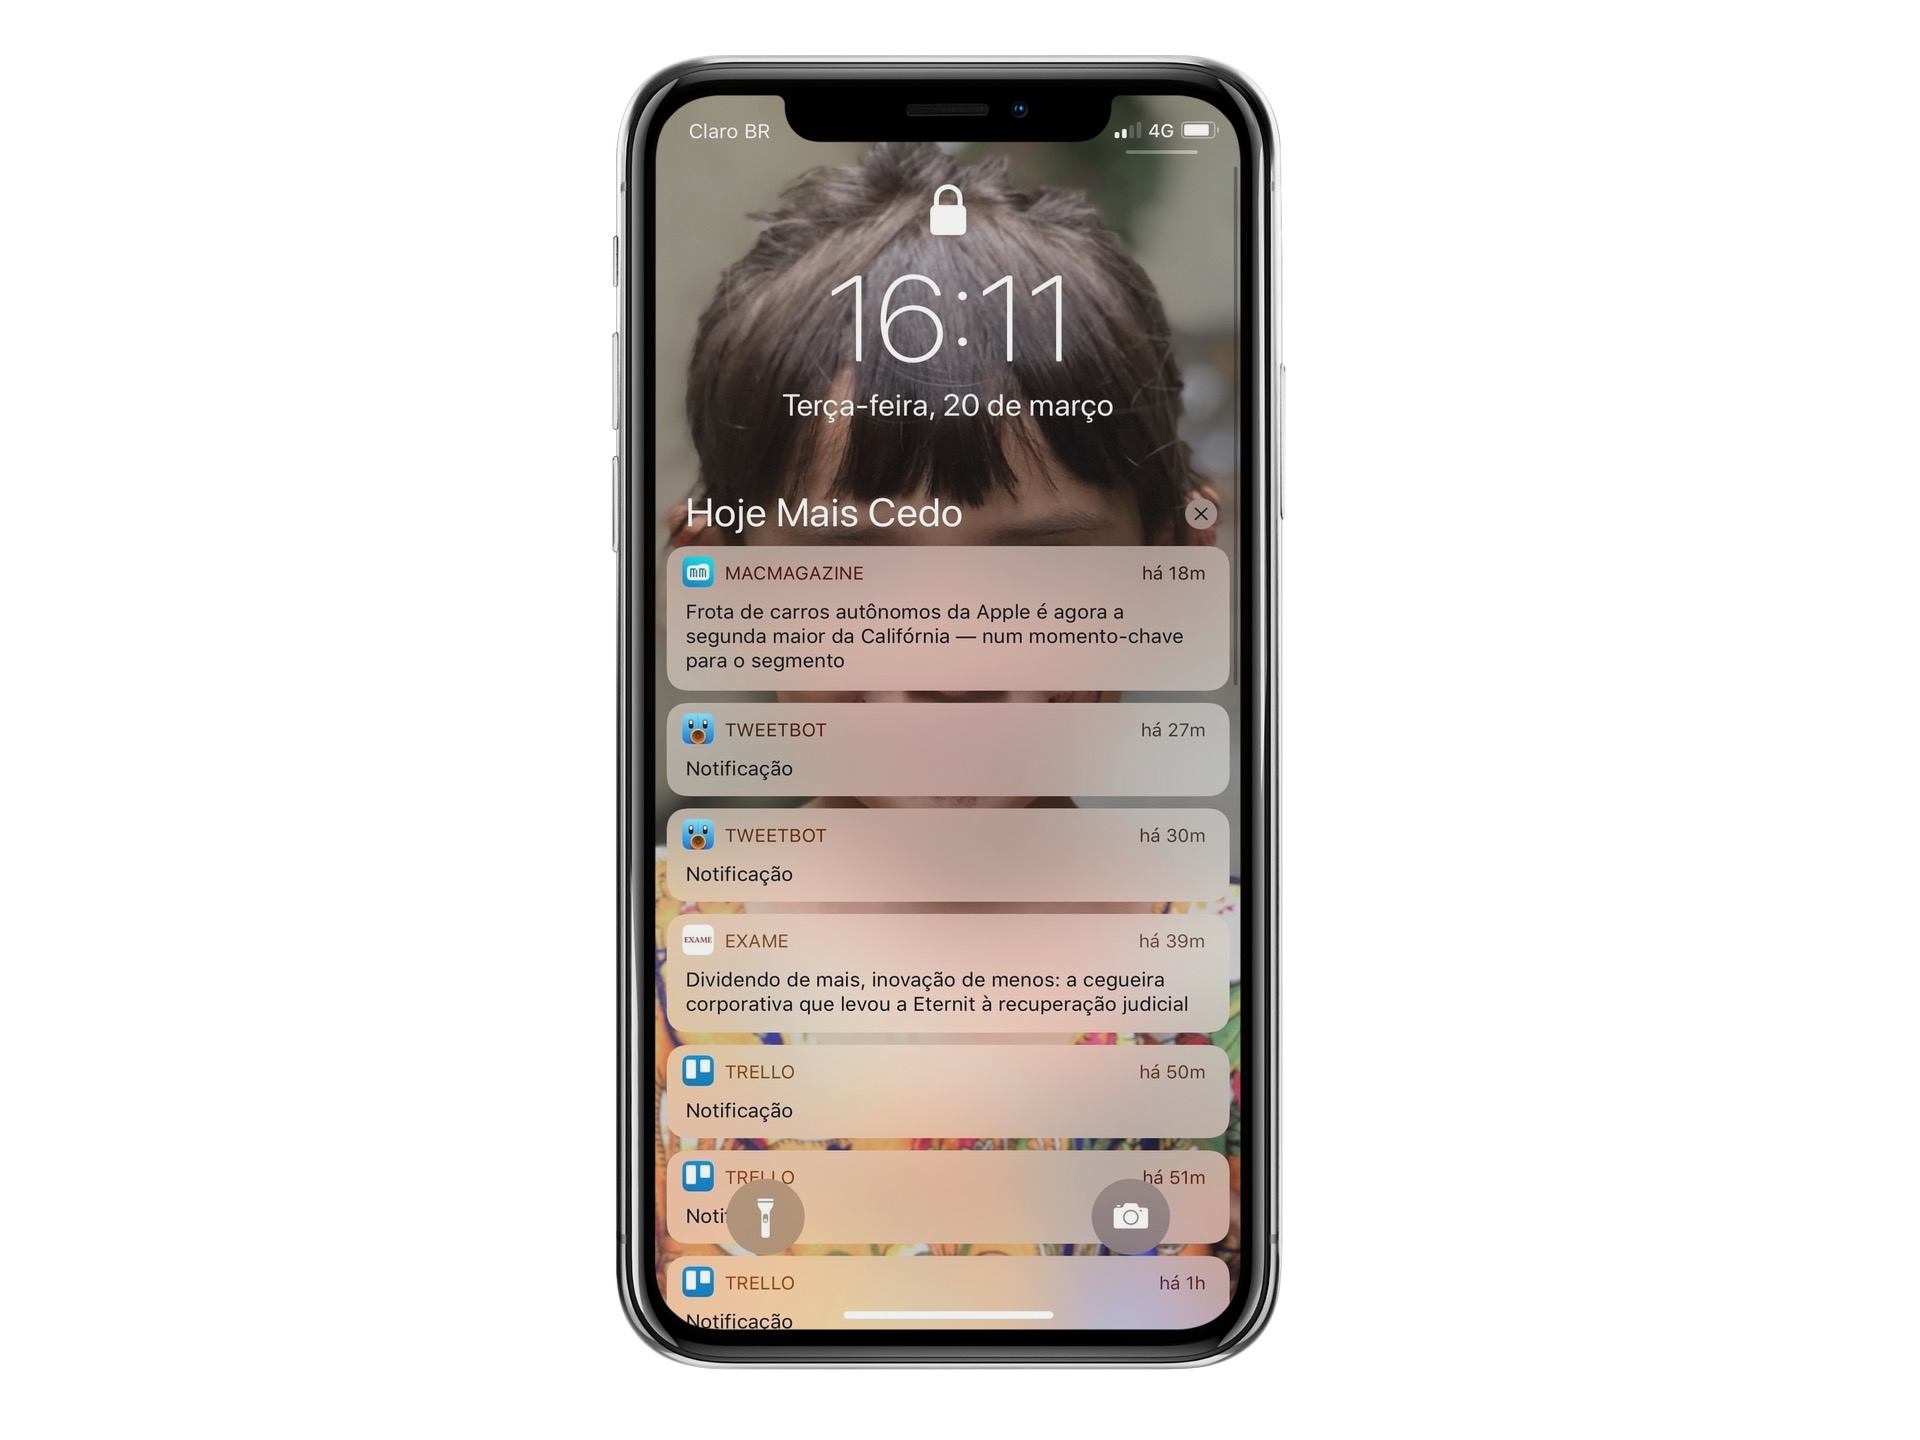 Apple confirms it will fix Siri bug by reading “hidden” notifications on the locked screen